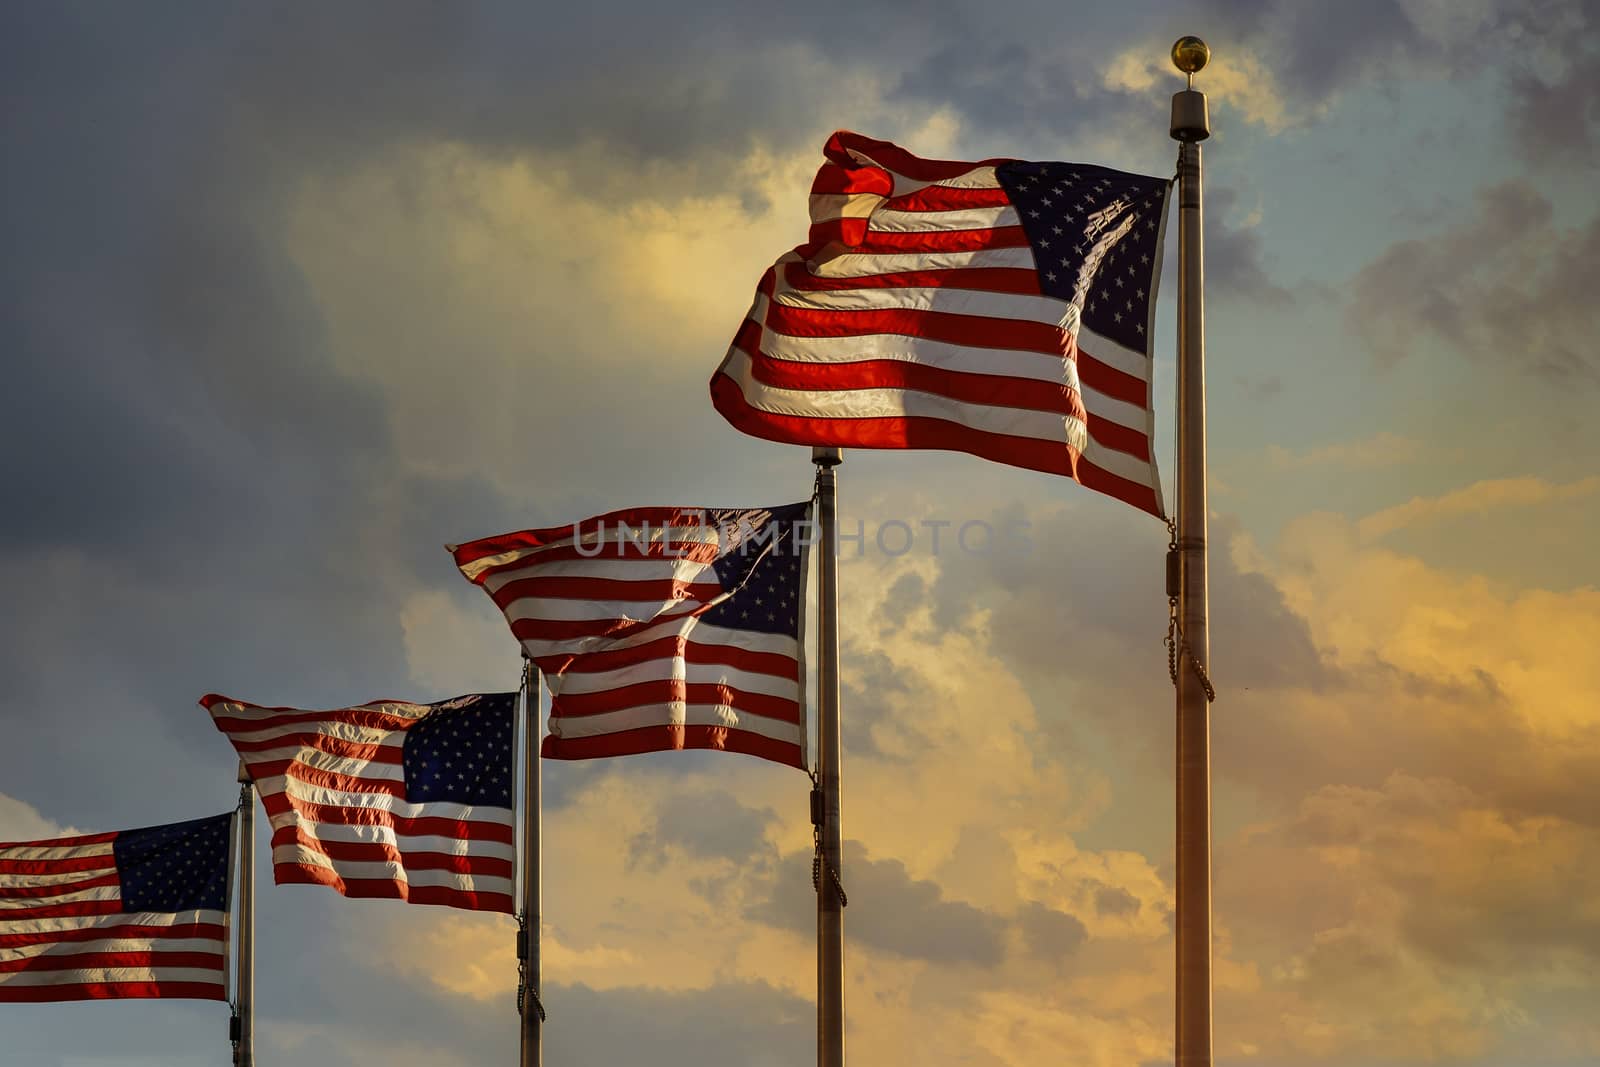 God bless America, US flag during an amazing soft sunset